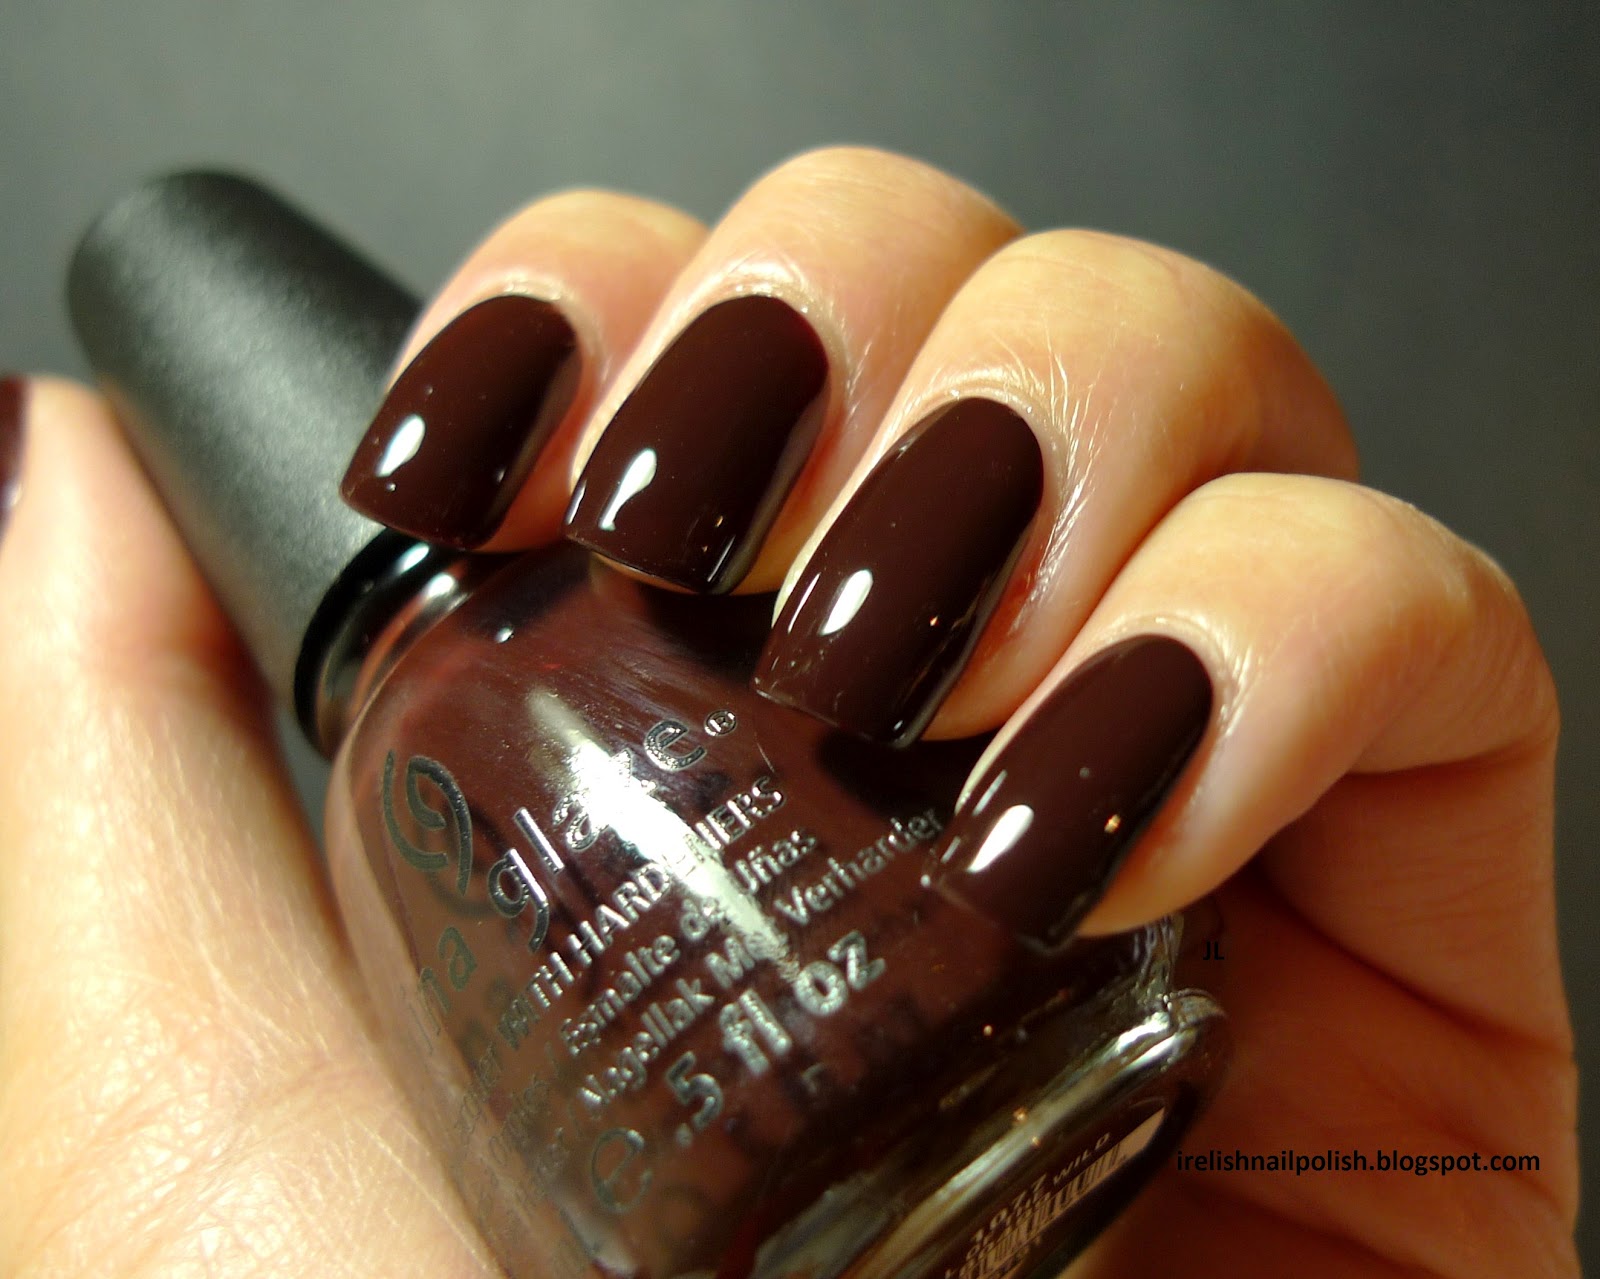 8. "Chocolate Brown" - wide 6